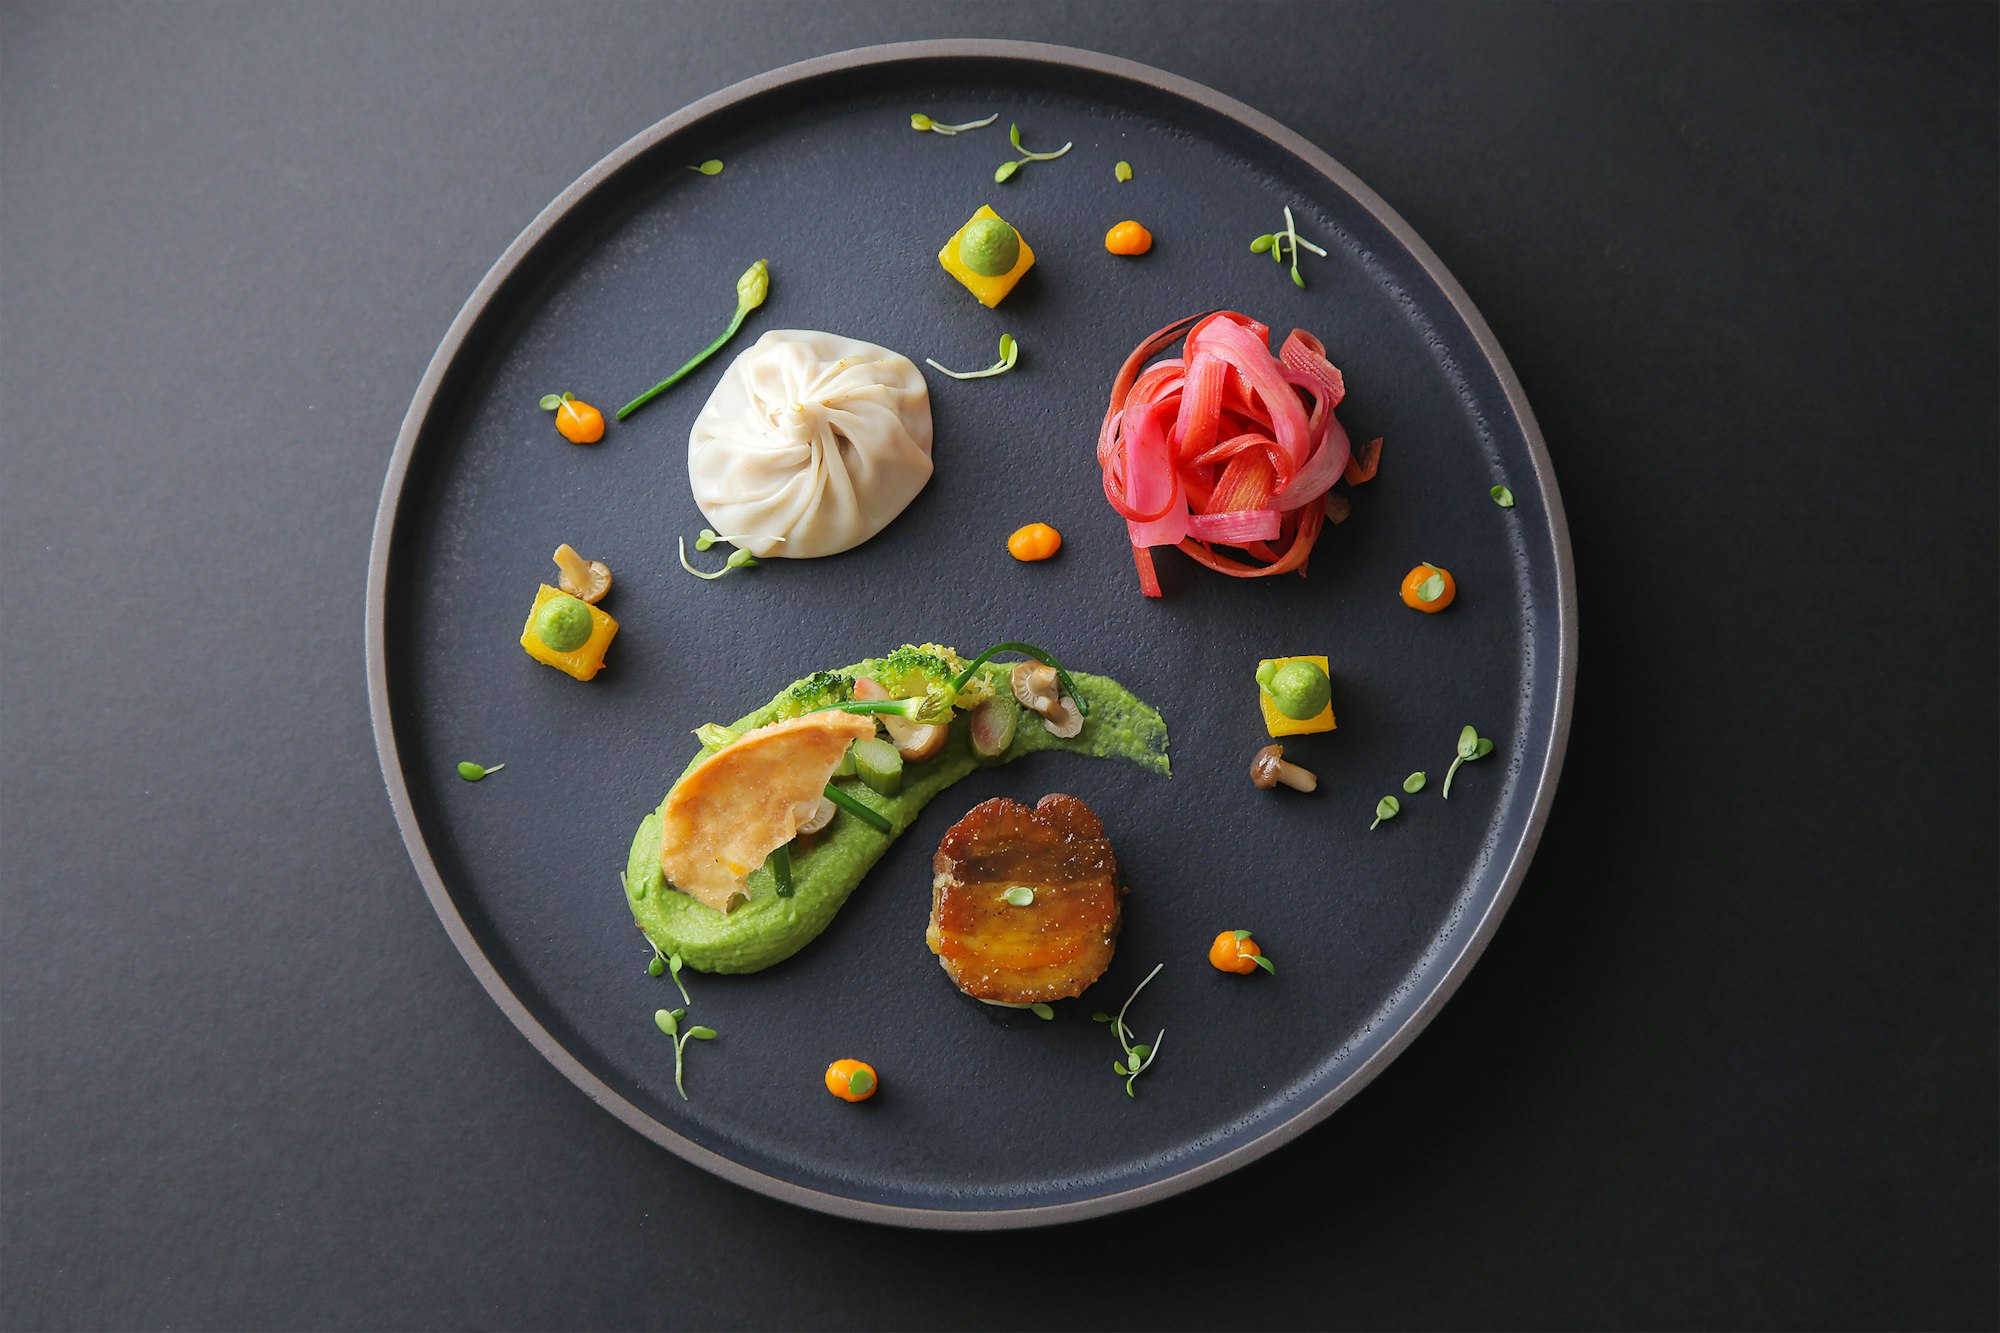 ‘Spring Dumpling’ by the French chef Laura Le Sort